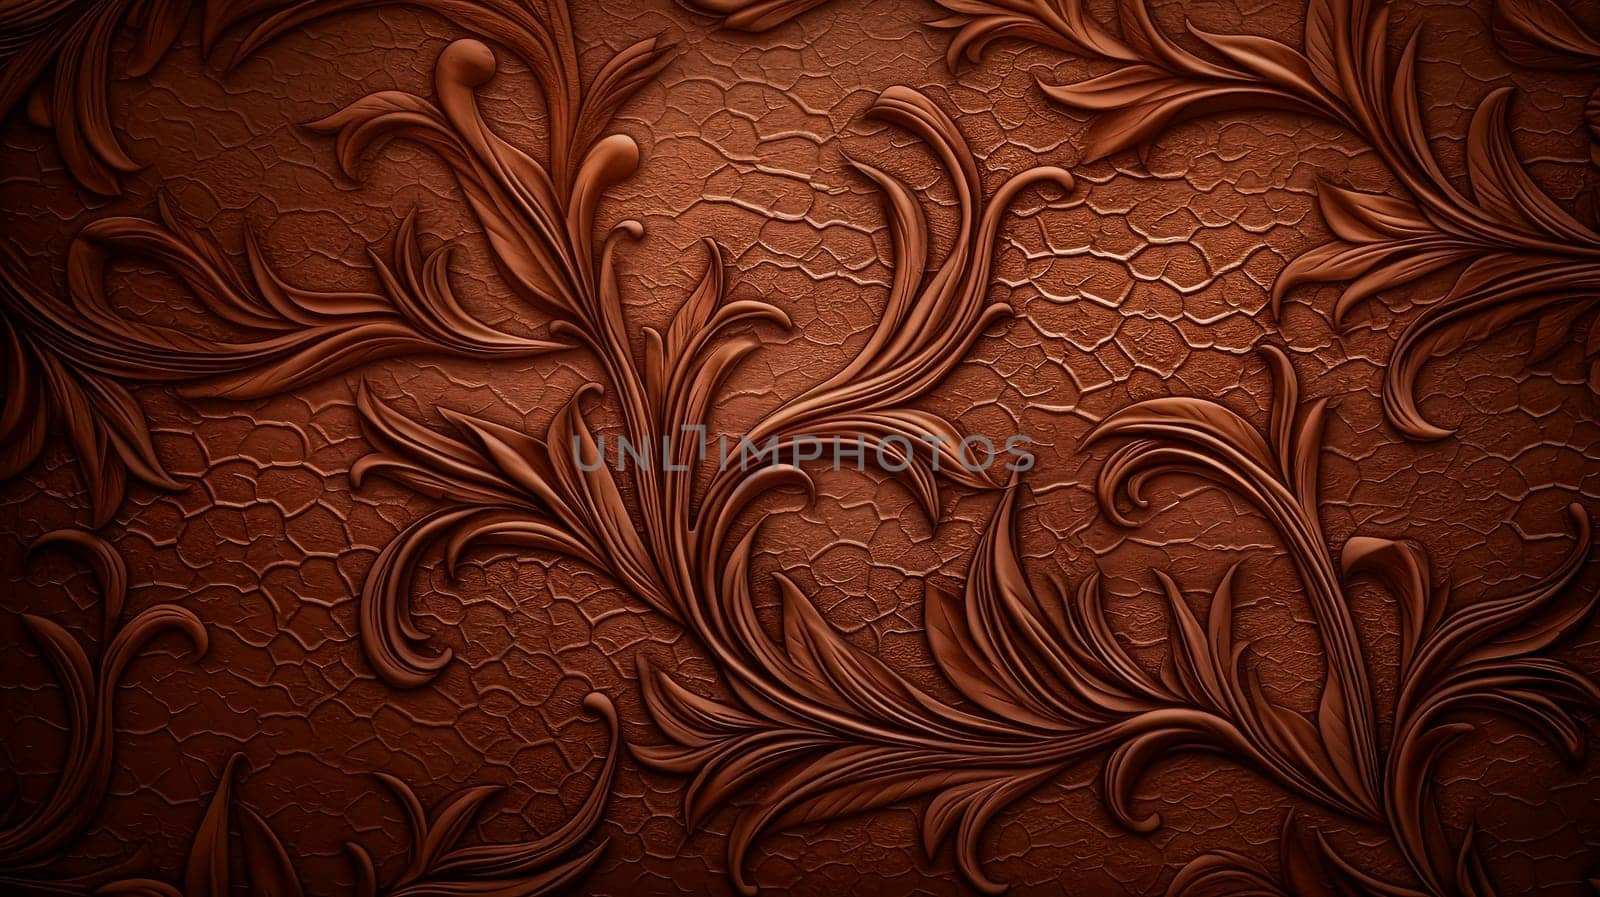 A brown and gold floral wallpaper with a floral design. by Alla_Morozova93